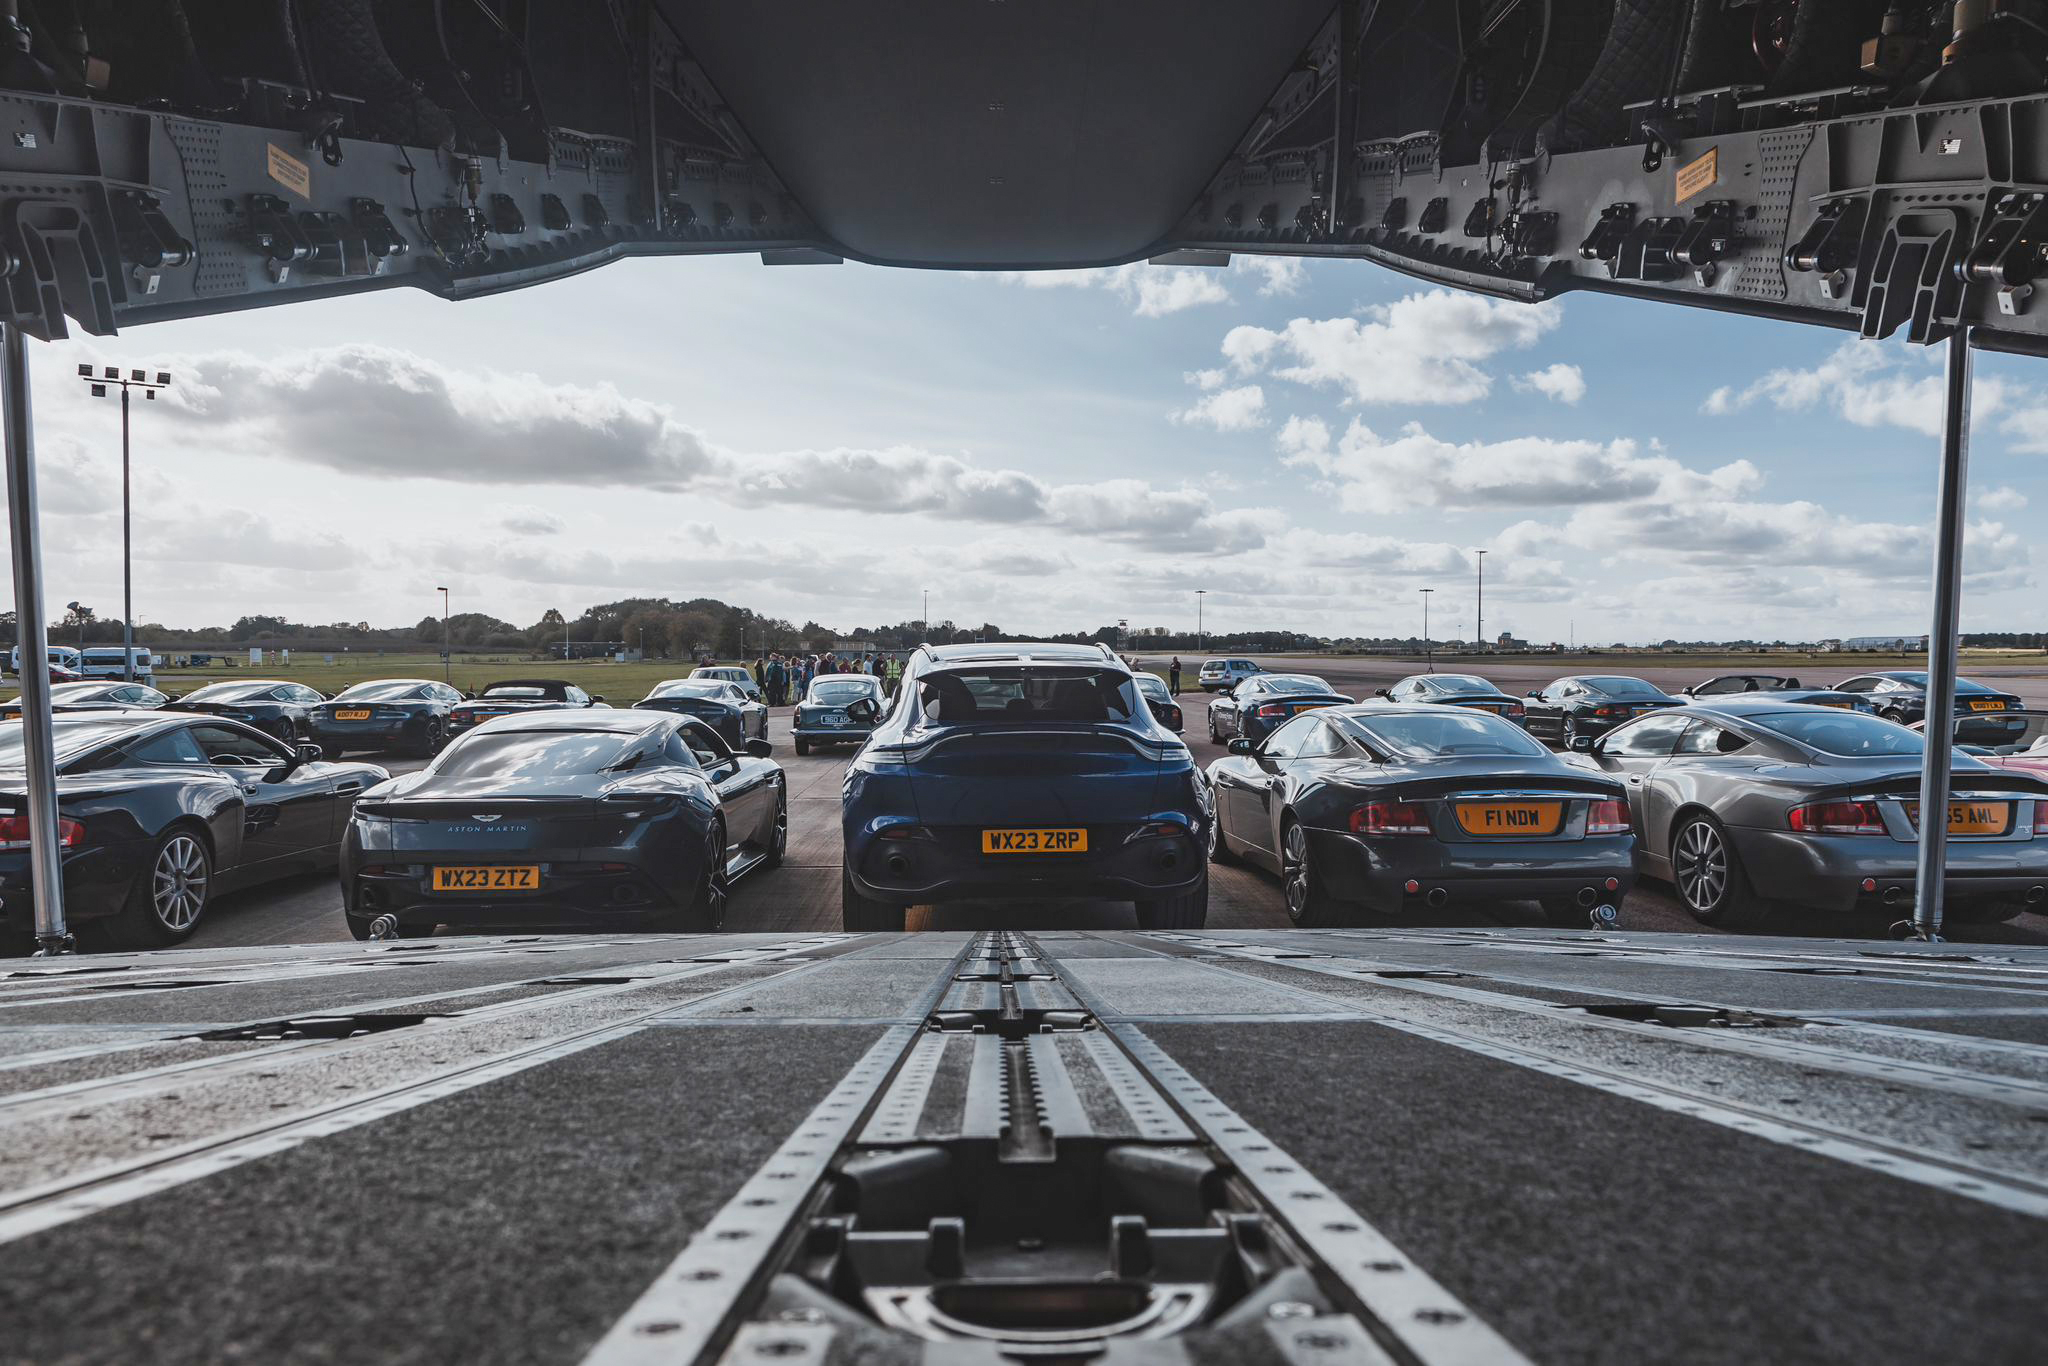 Photo - Aston Martin vehicles lined-up behind an Atlas C Mk.1 (A400M), viewed from the aircraft ramp